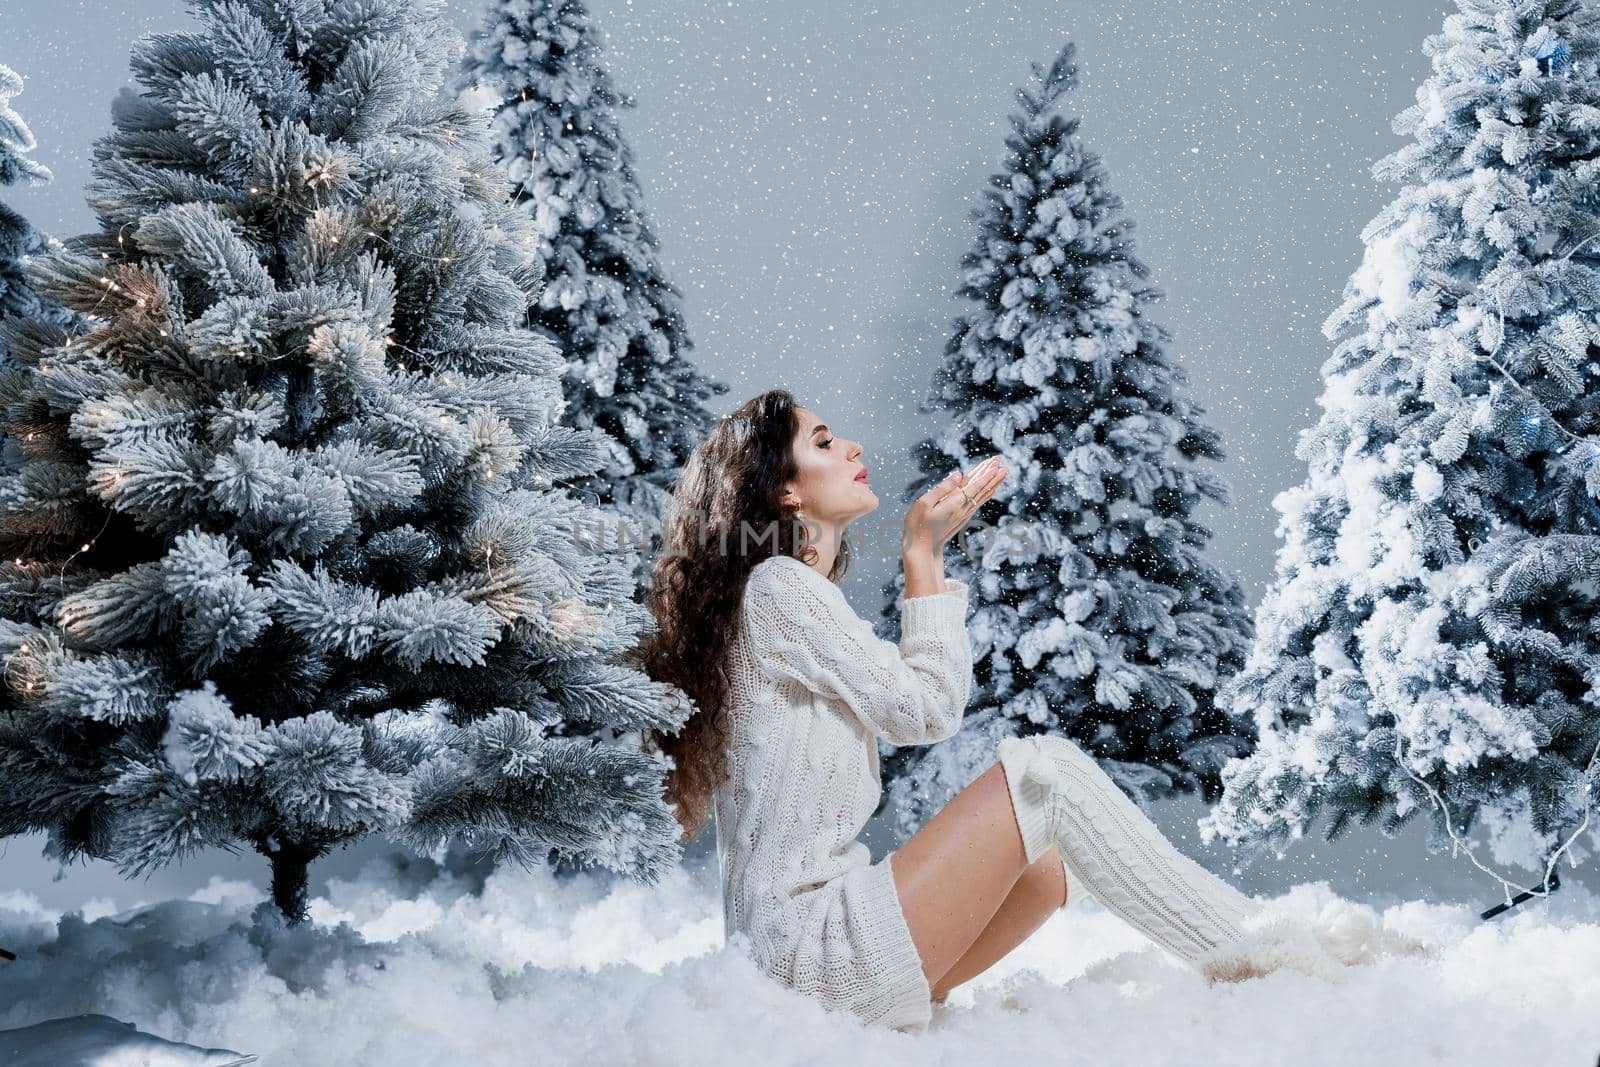 New year celebration. Attractive girl close-up with falling snow . Young woman weared in a warm white pullover and white socks